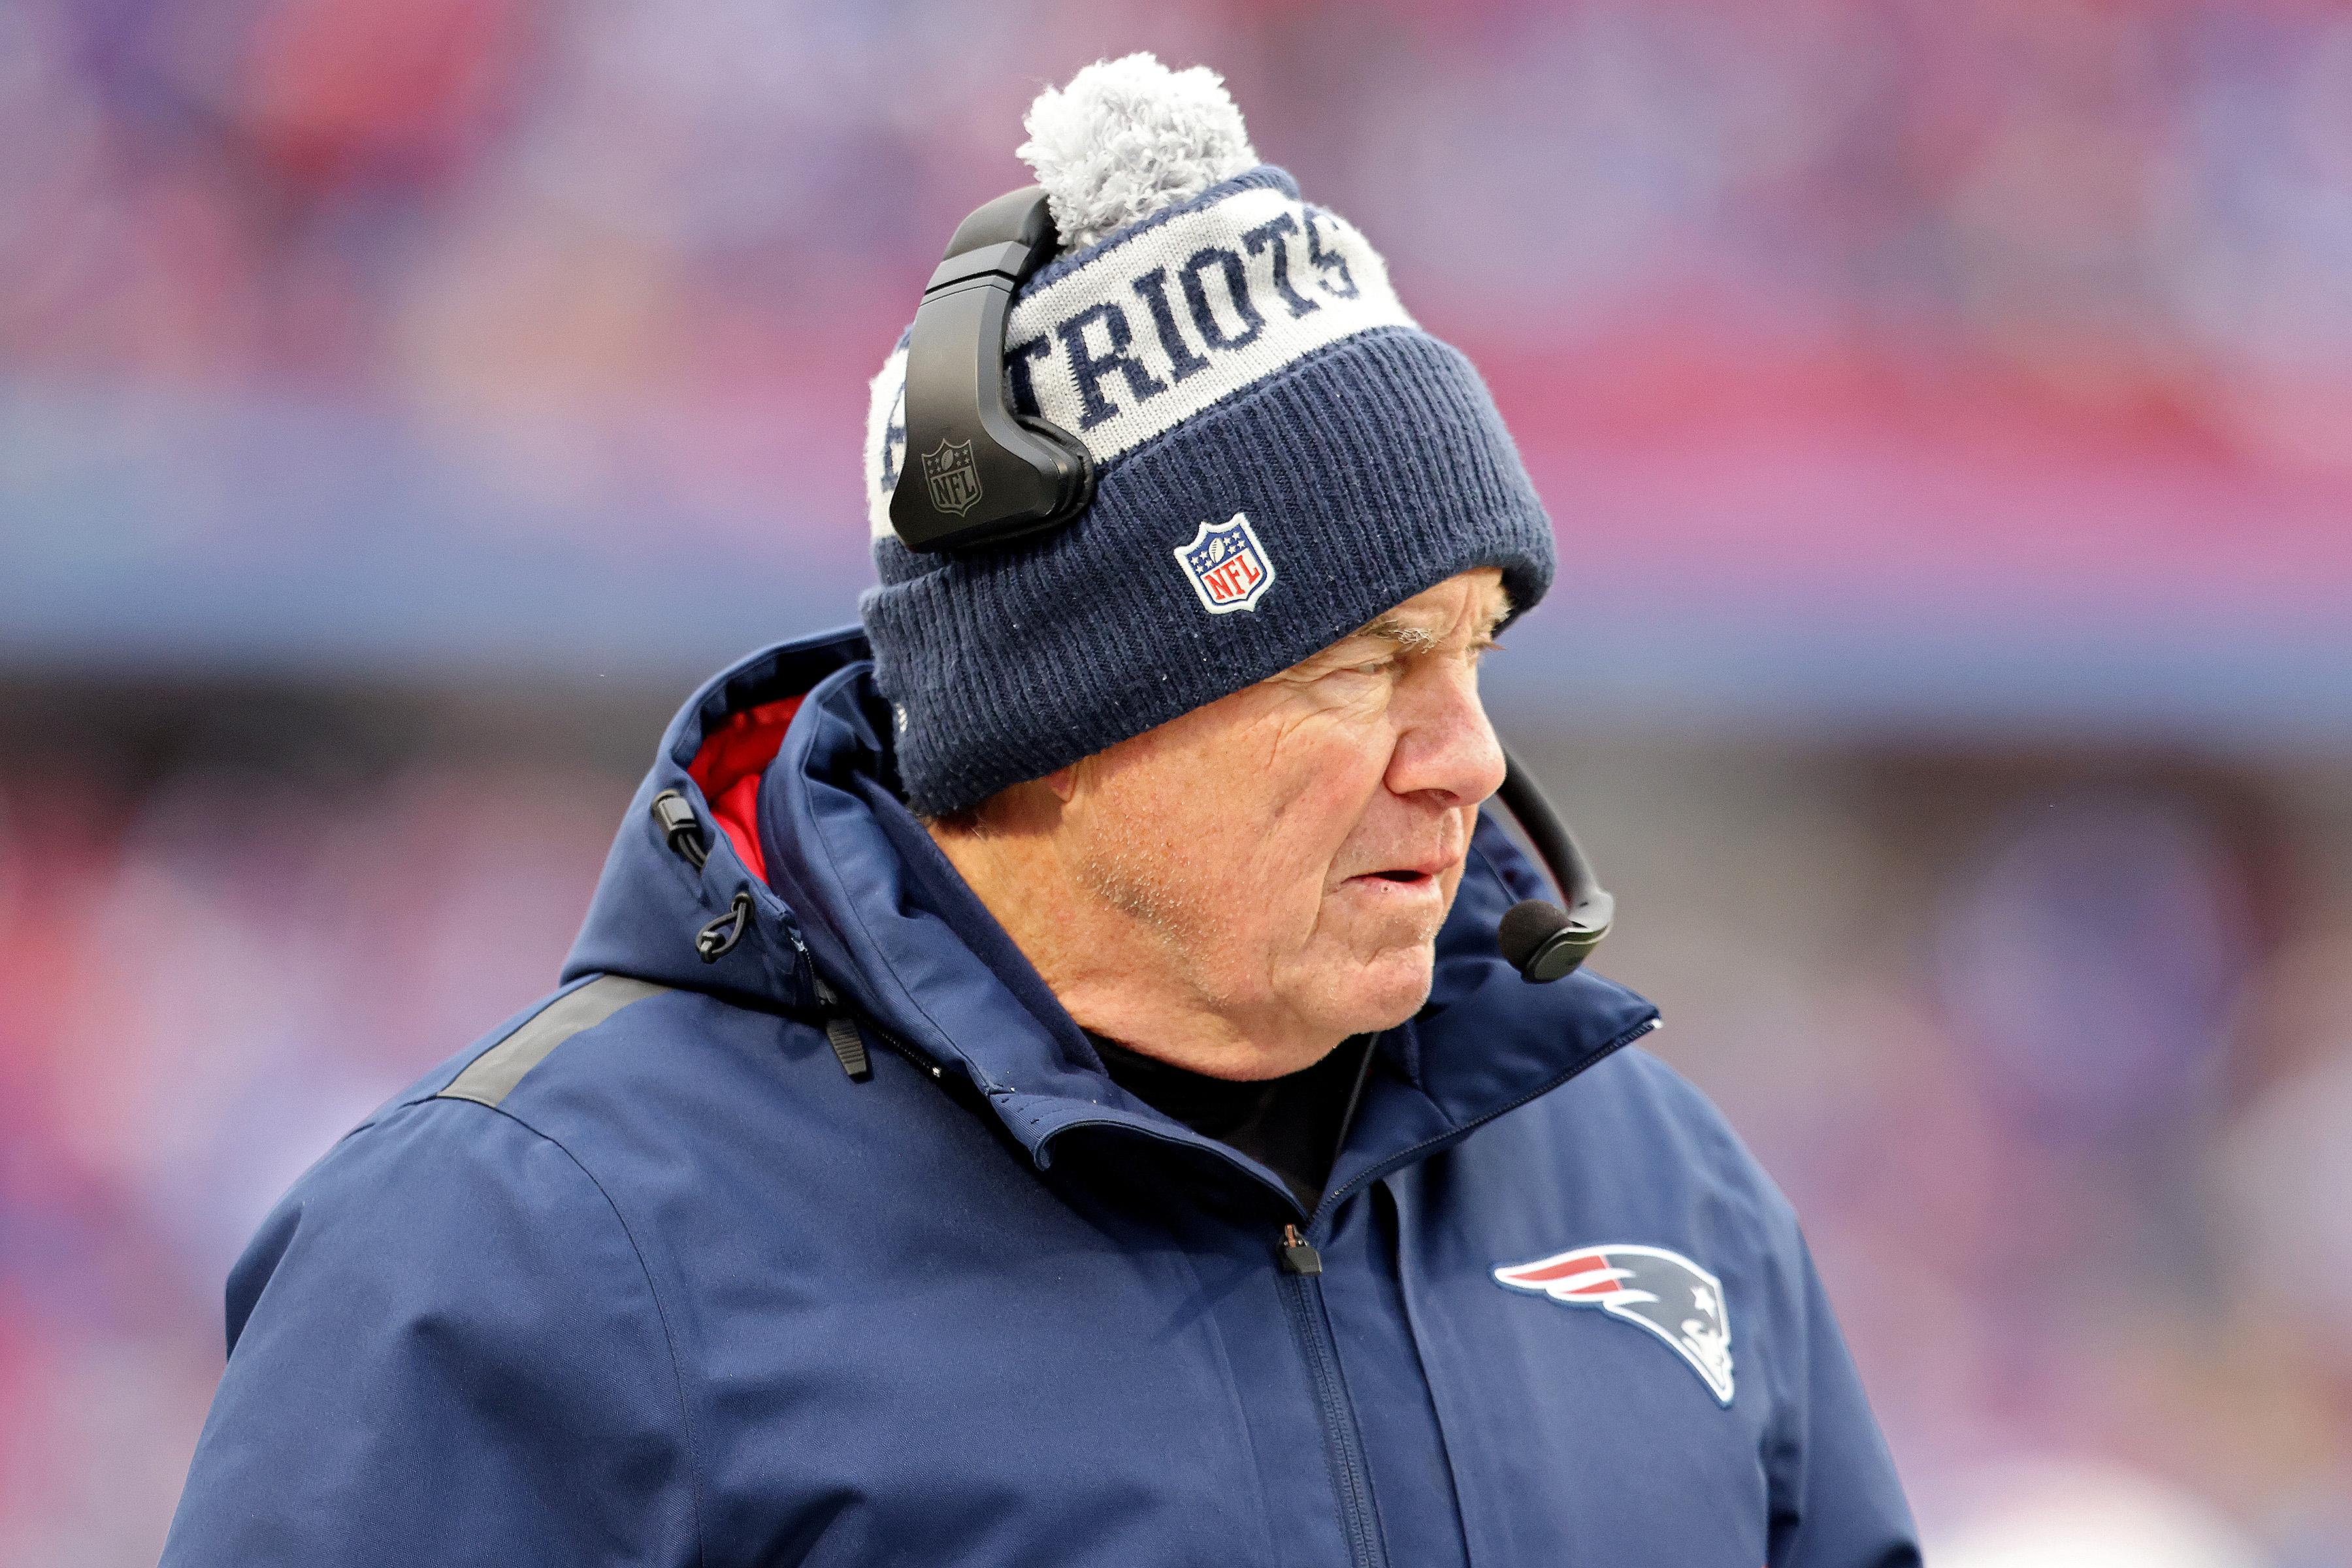 Belichick on the sideline in winter hat, headset, and parka